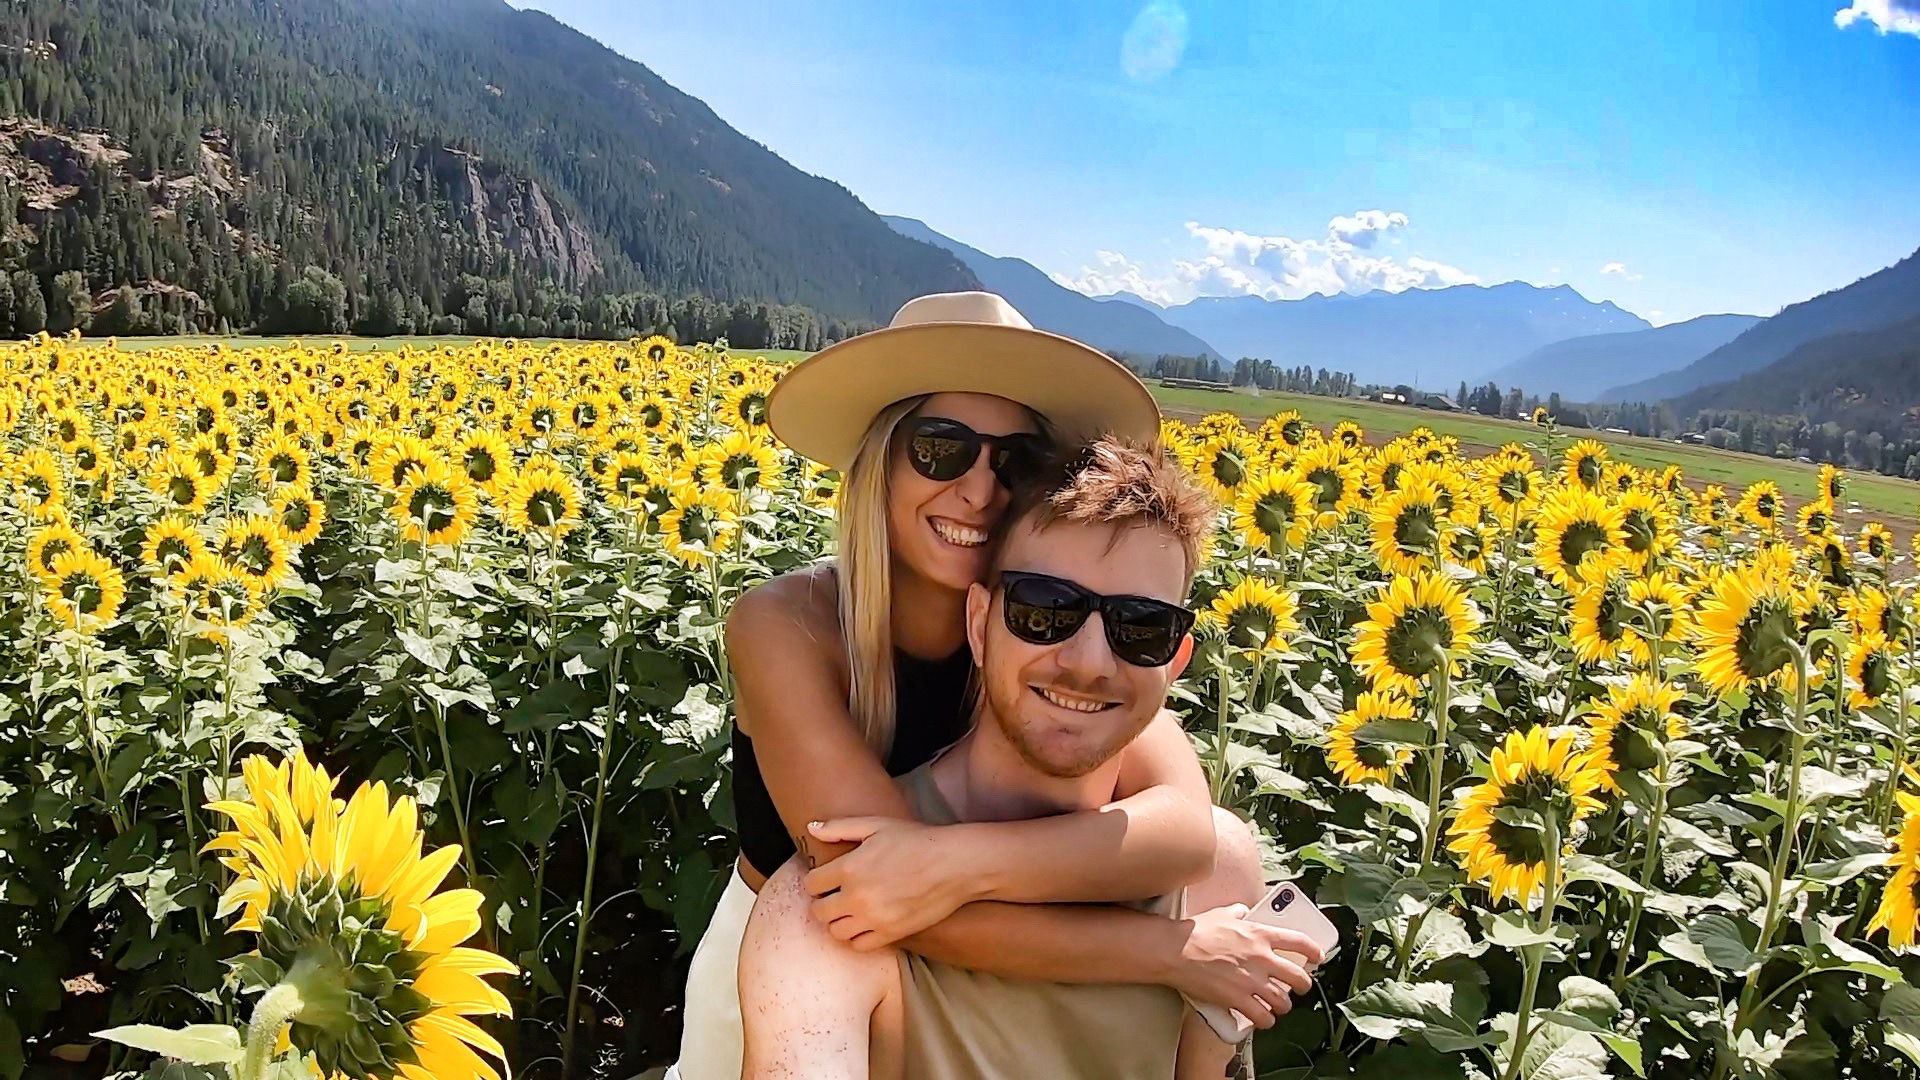 Couple smiling and together in a field of sunflowers